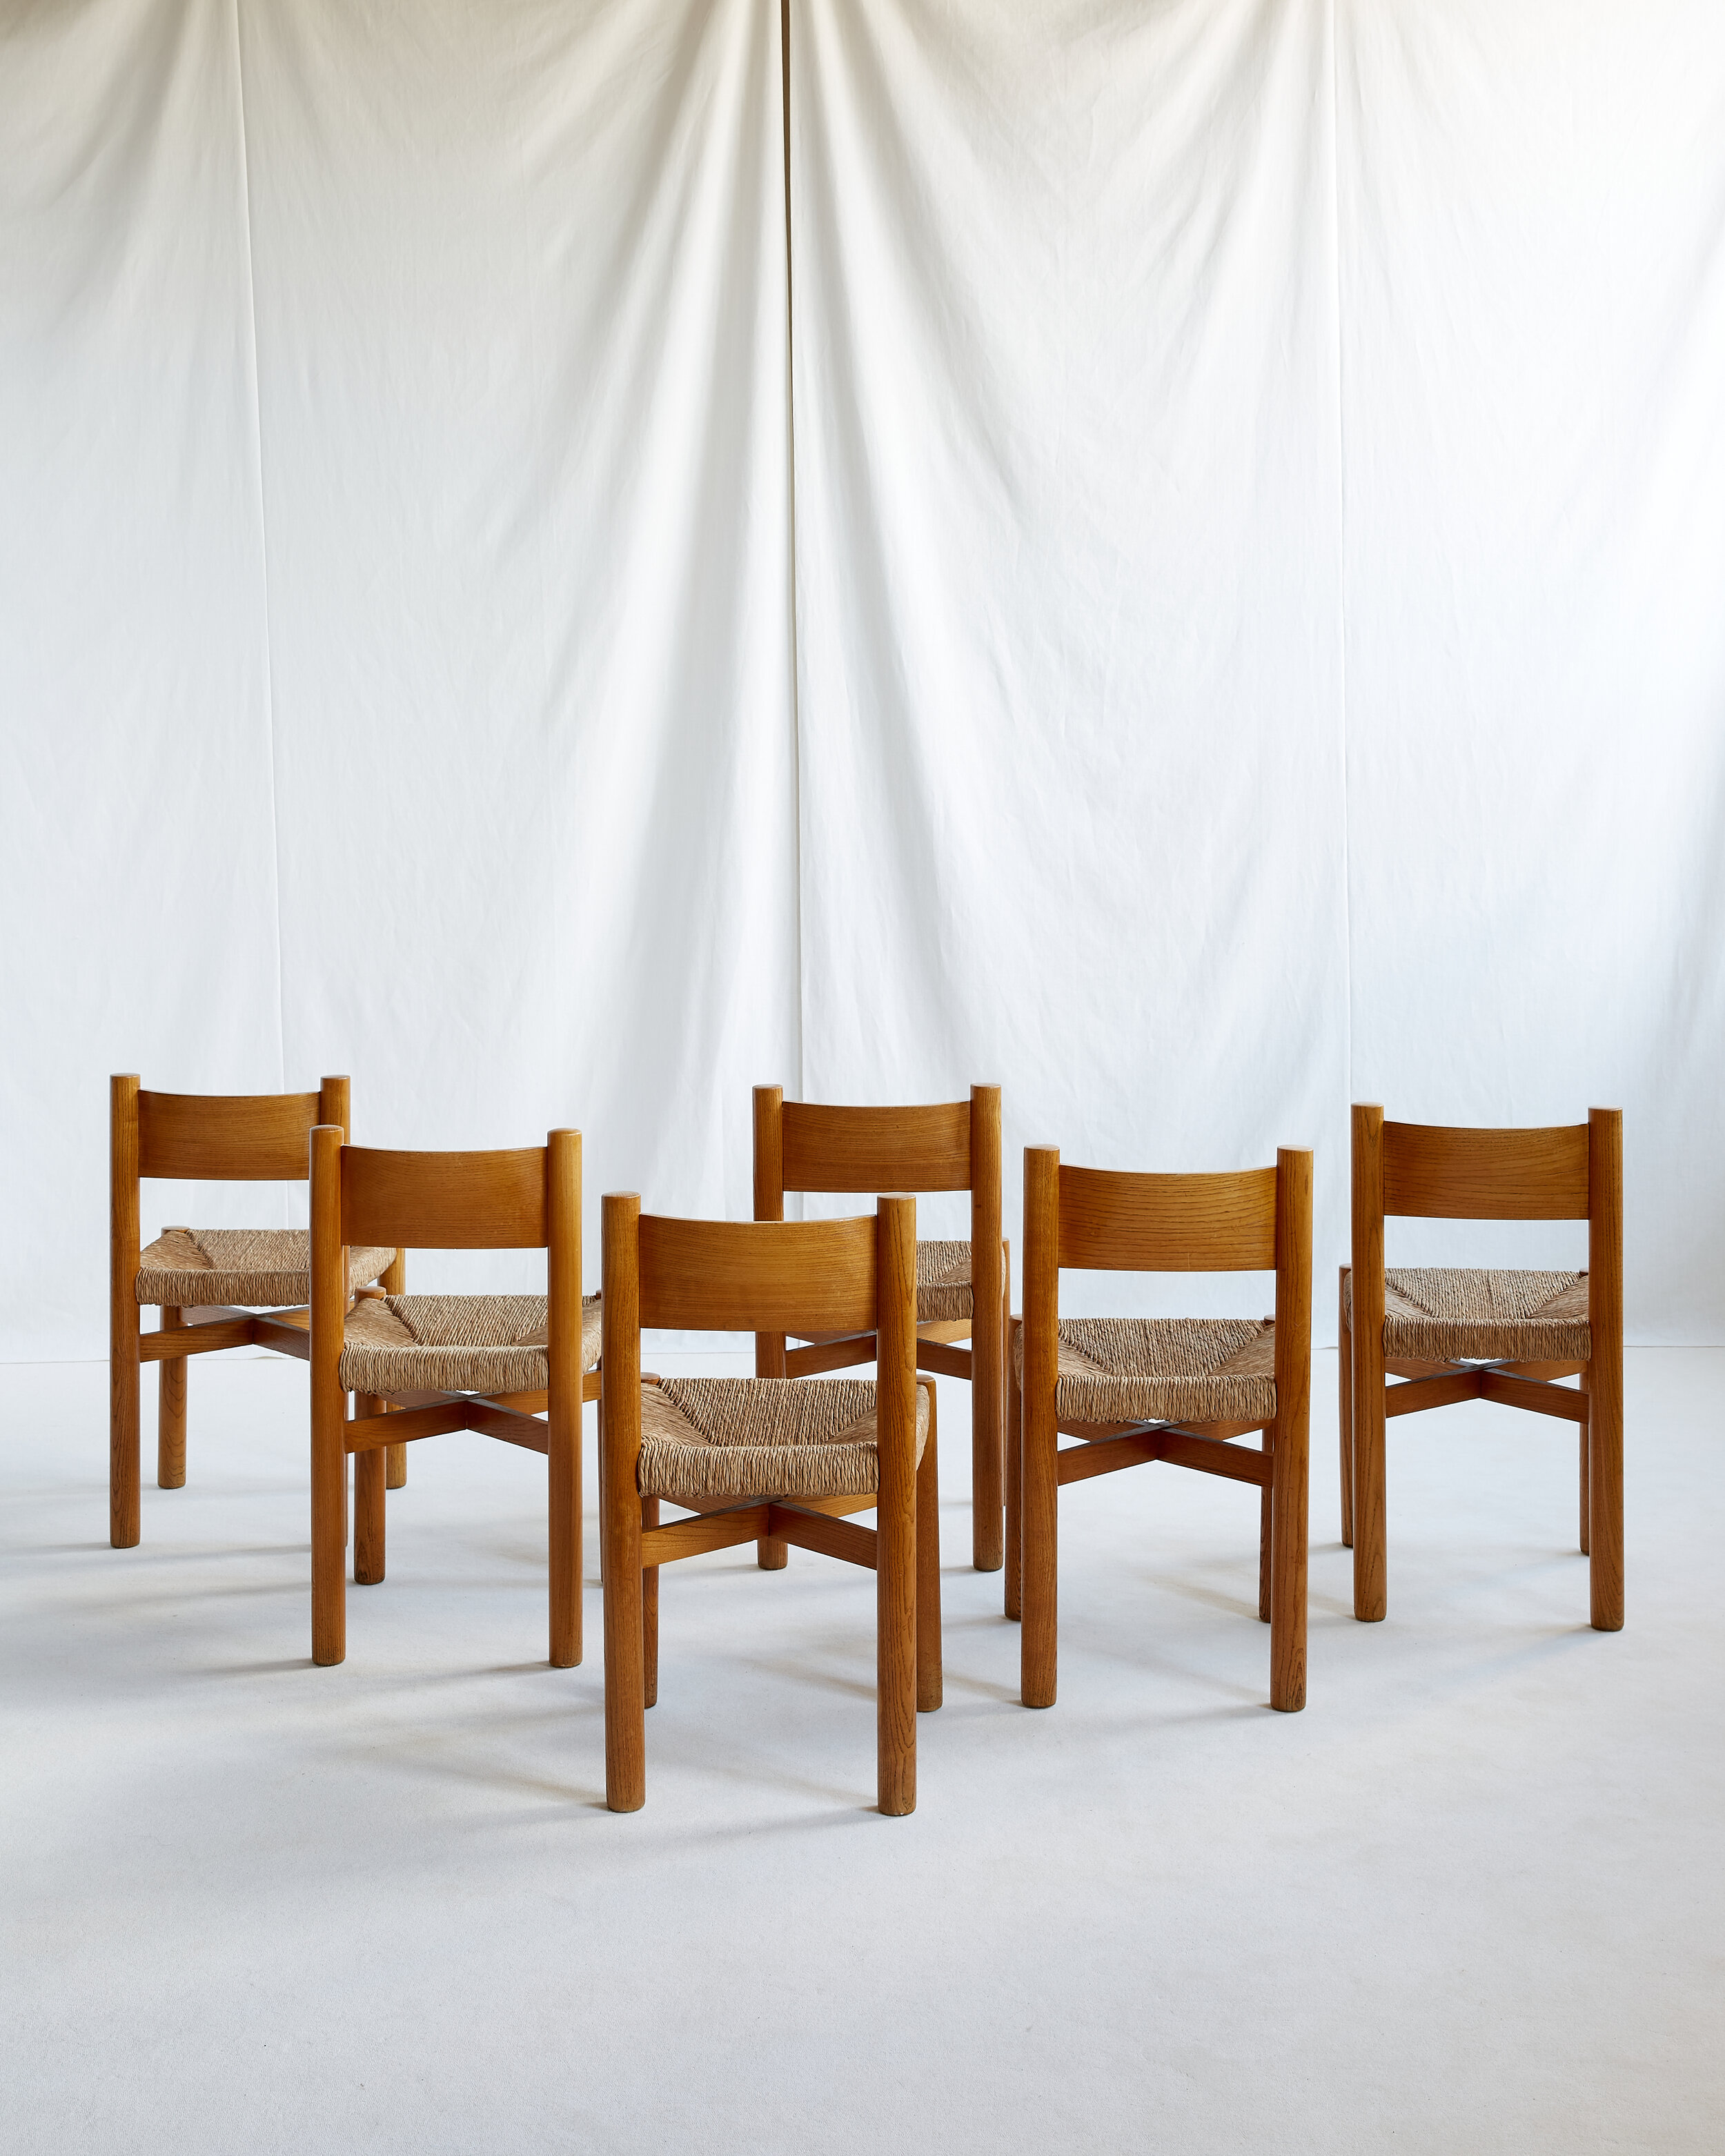 Meribel dining chairs by Charlotte Perriand – Espacemoderne